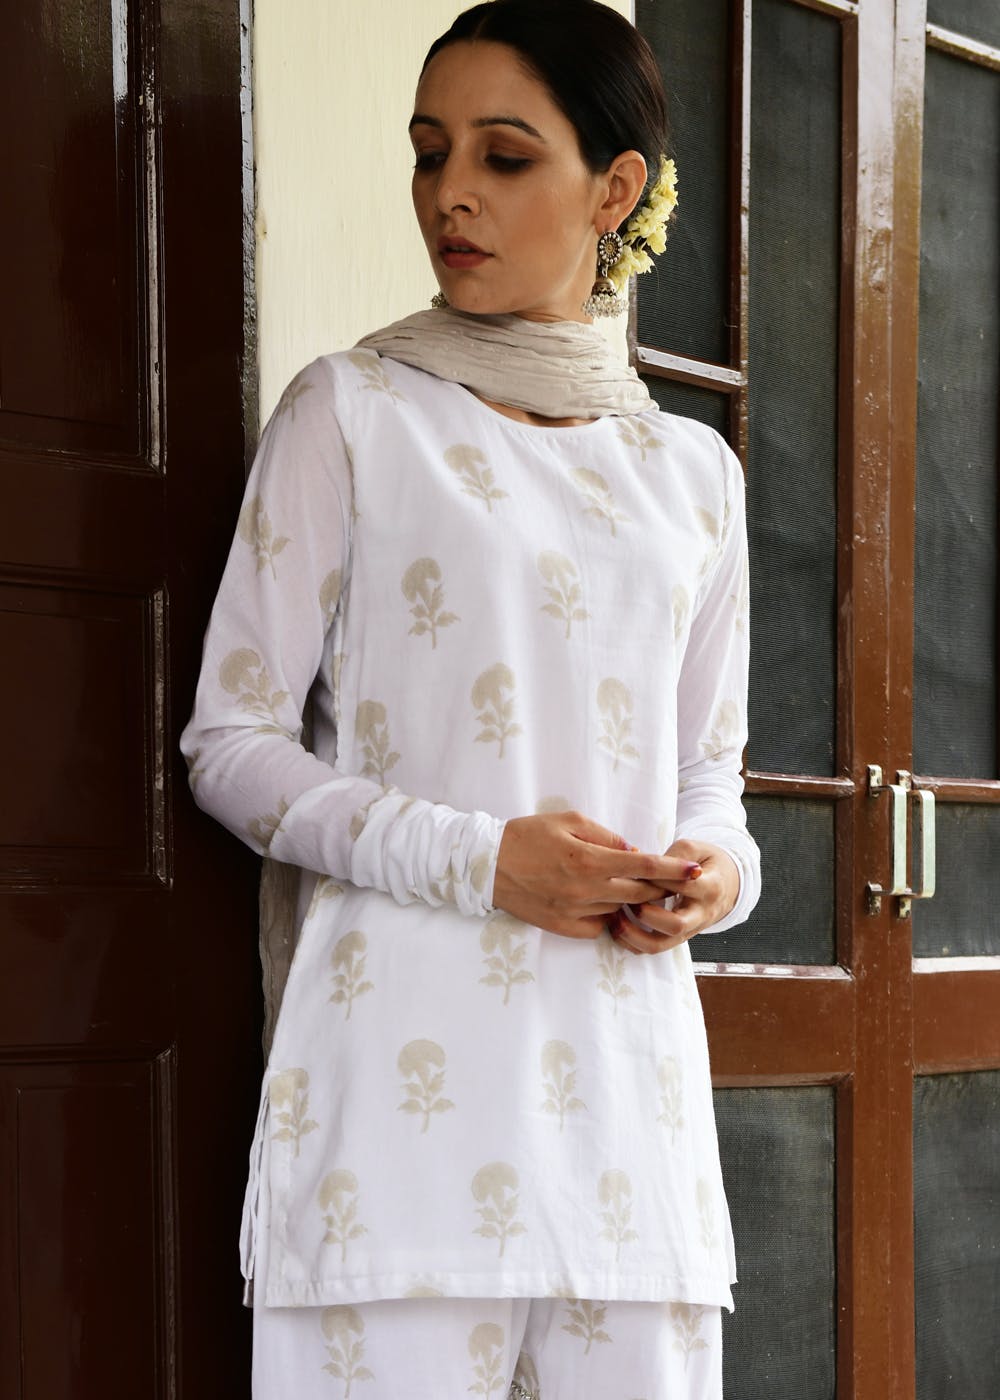 Full Sleeves Designer Wear White Colour Ladies Kurti With Golden Embroidery  Decoration Material: Beads at Best Price in Hyderabad | Saai Creations